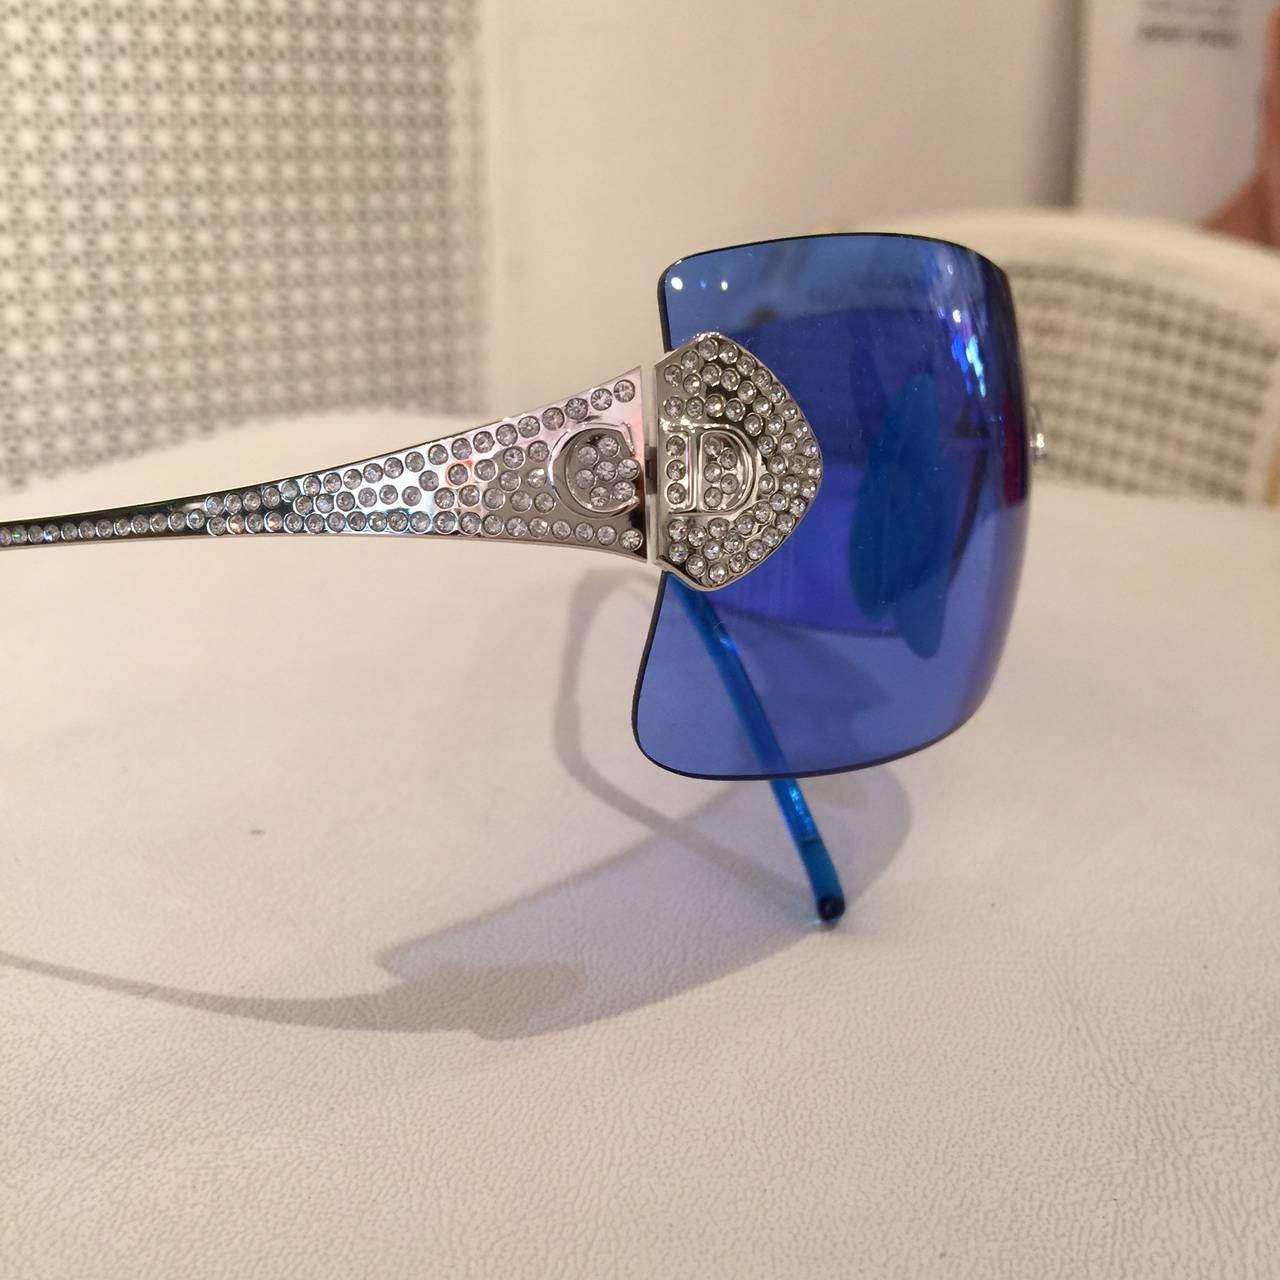 Very chic blue tinted sunglasses by Christian Dior...with crystal encrusted
goldtone monogram on sides...
comes with bow
impeccable condition